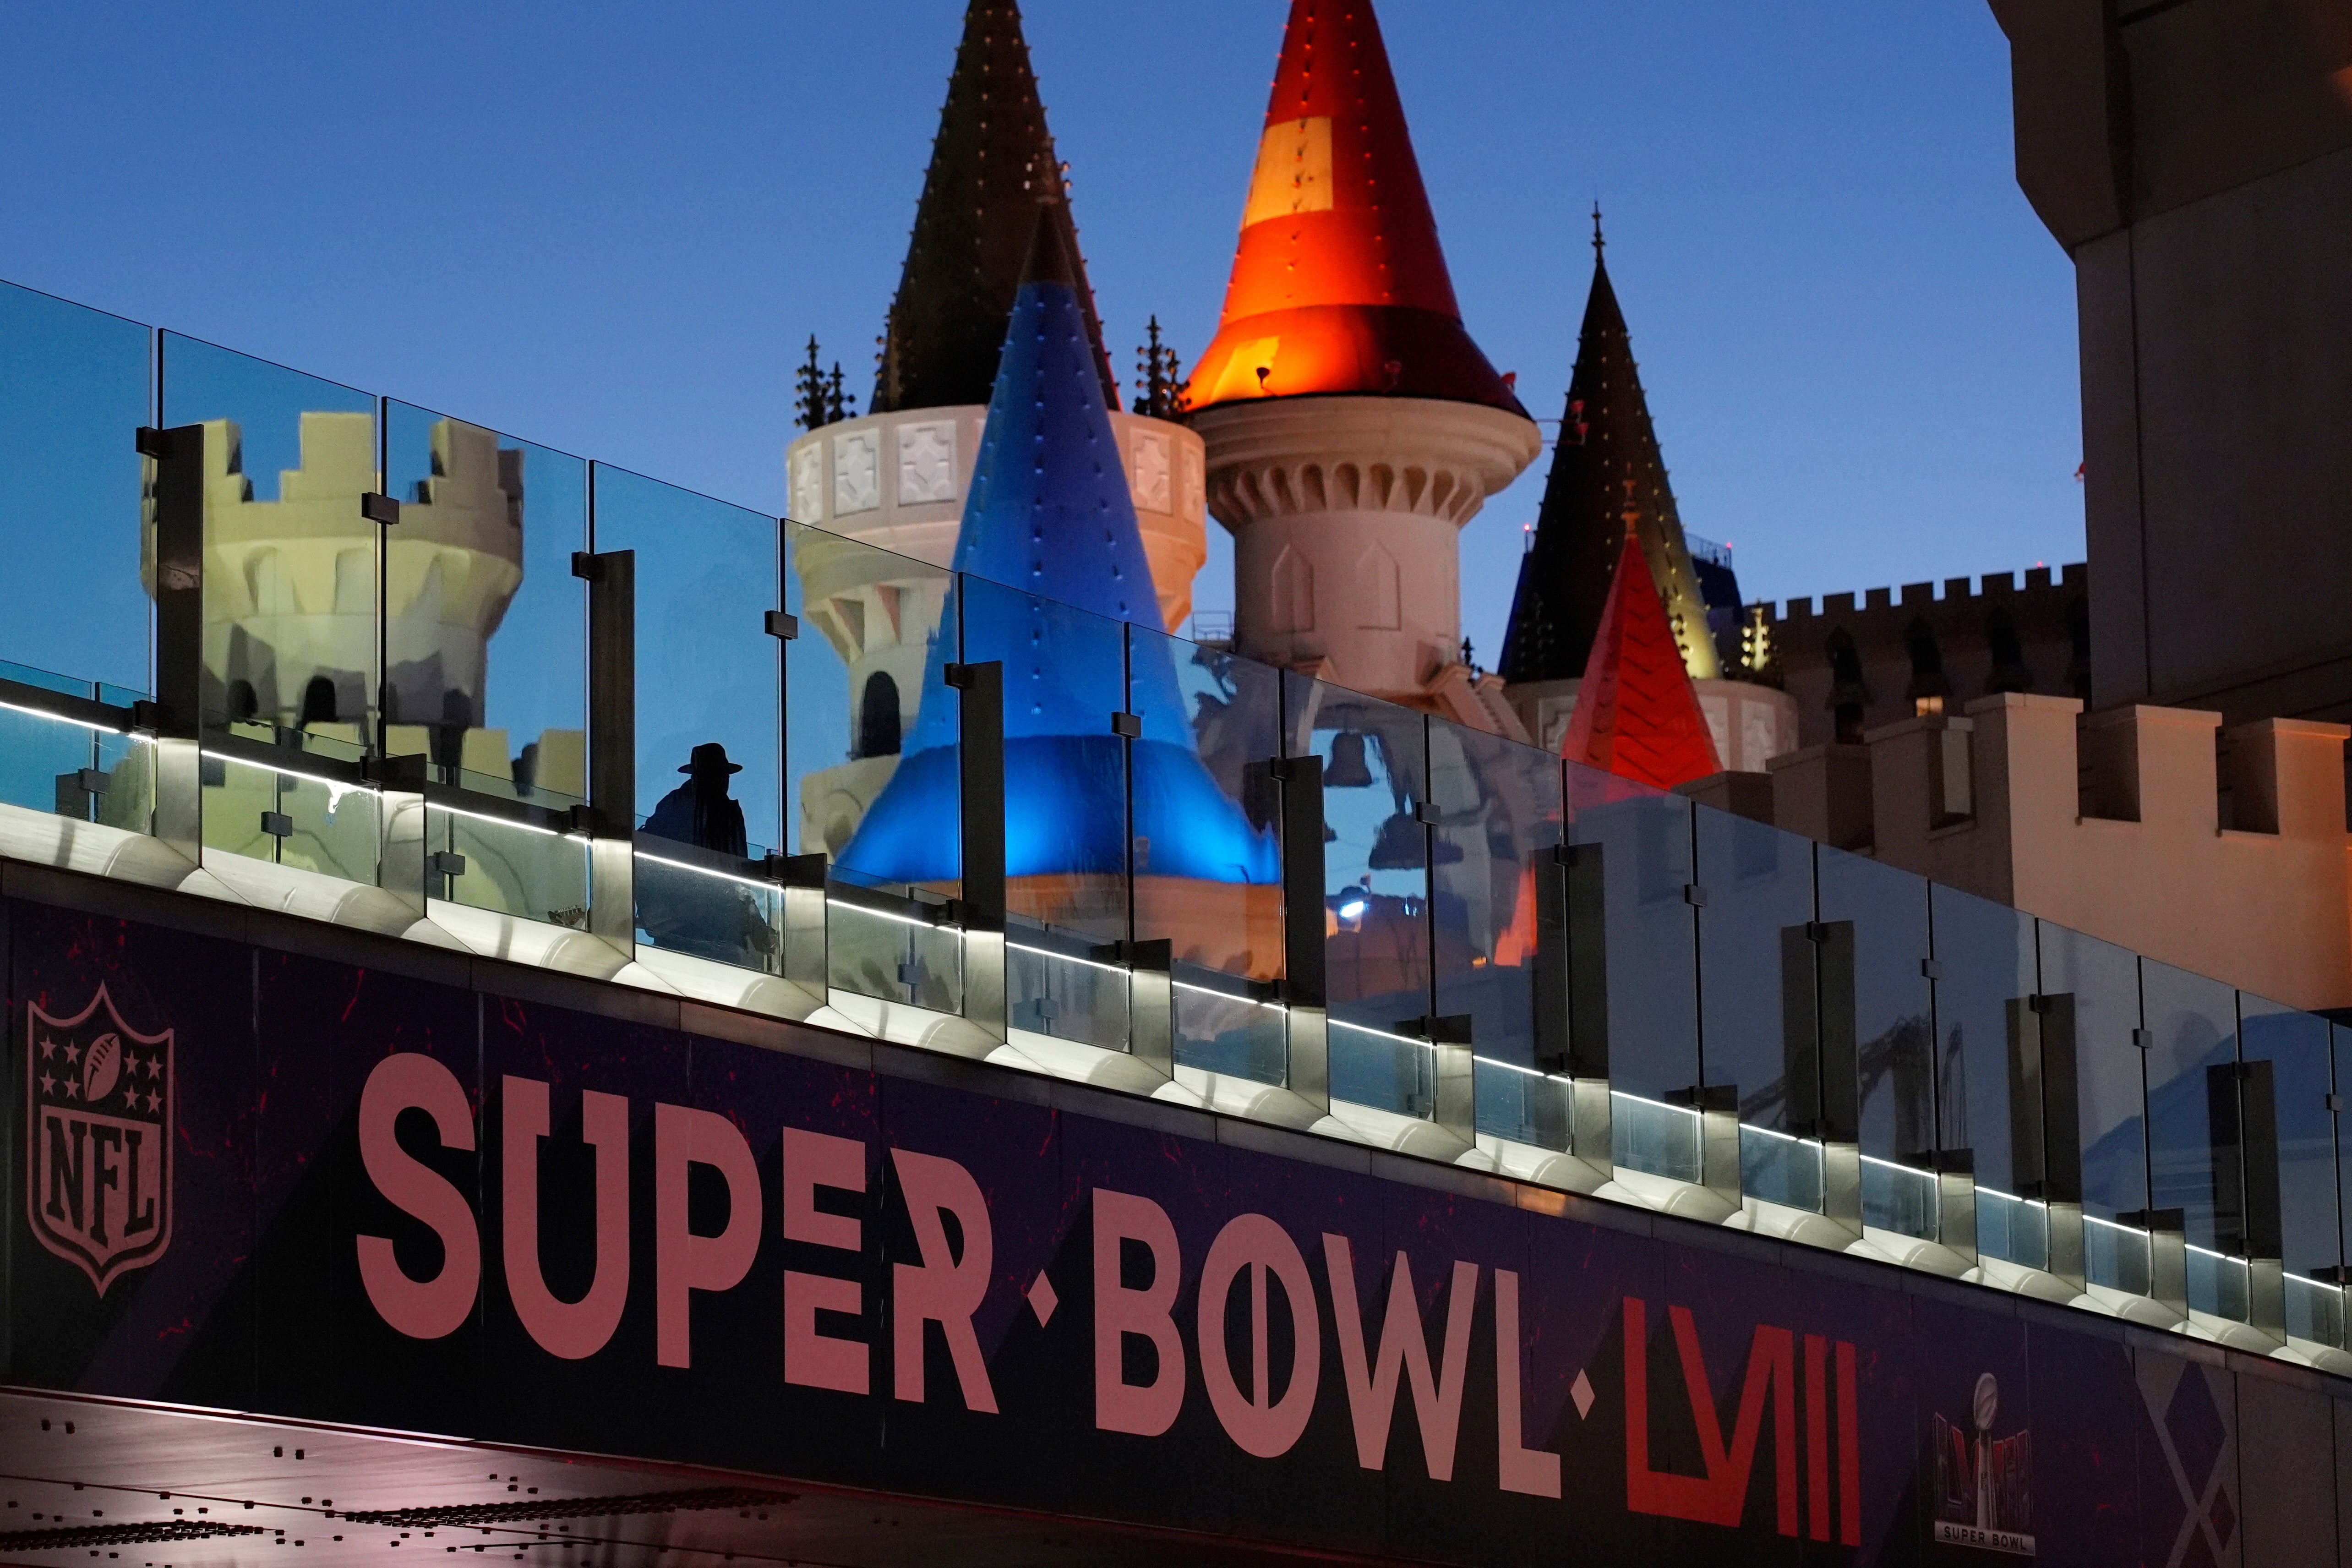 Las Vegas is expecting to see huge amounts of gambling thanks to the Super Bowl